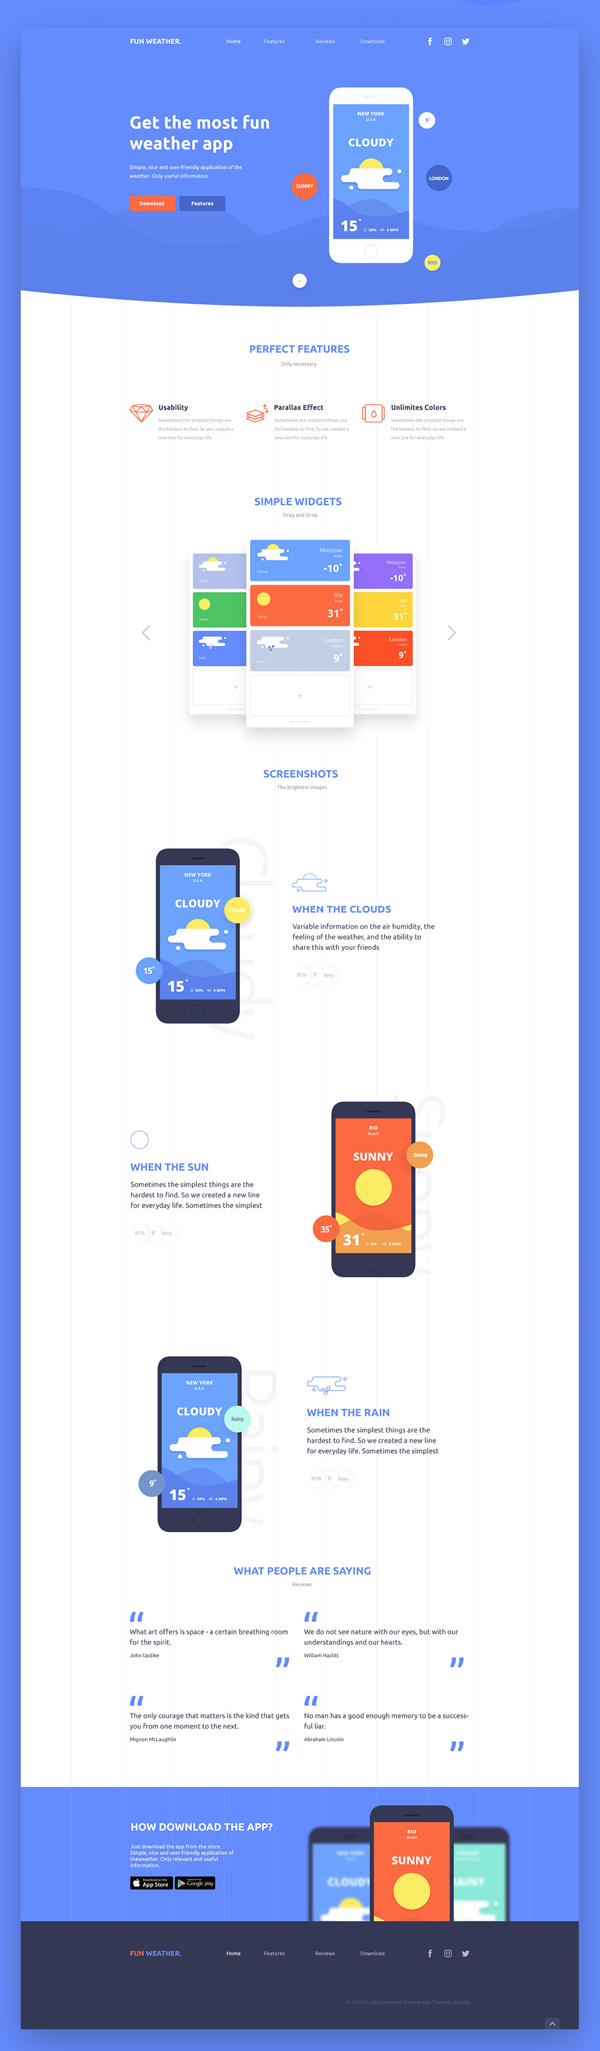 Free PSD Landing Page (Weather App)